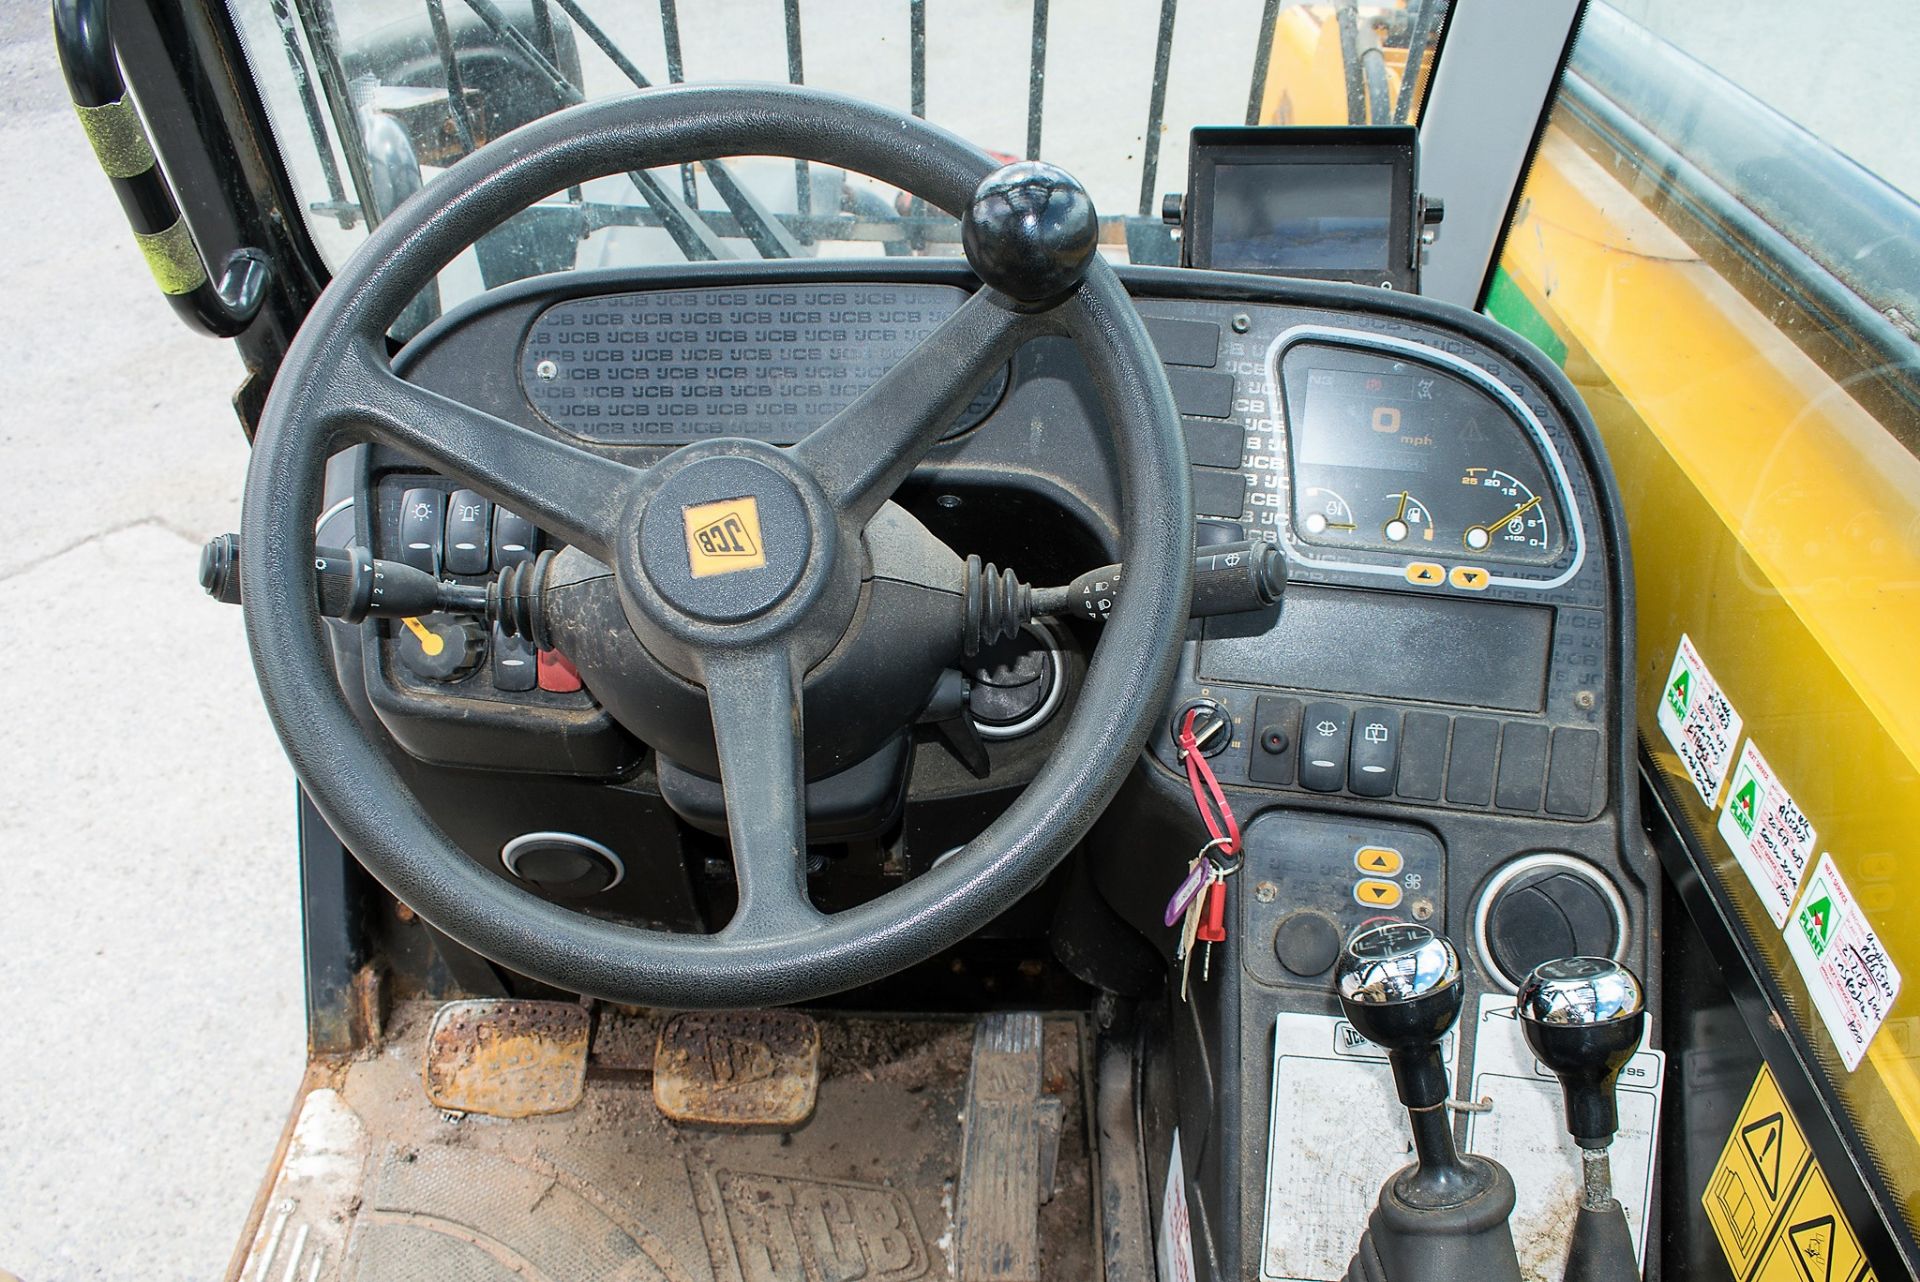 JCB 535-95 9.5 metre telescopic handler Year: 2013 S/N: 2180465 Recorded Hours: 756 c/w rear camera - Image 13 of 13